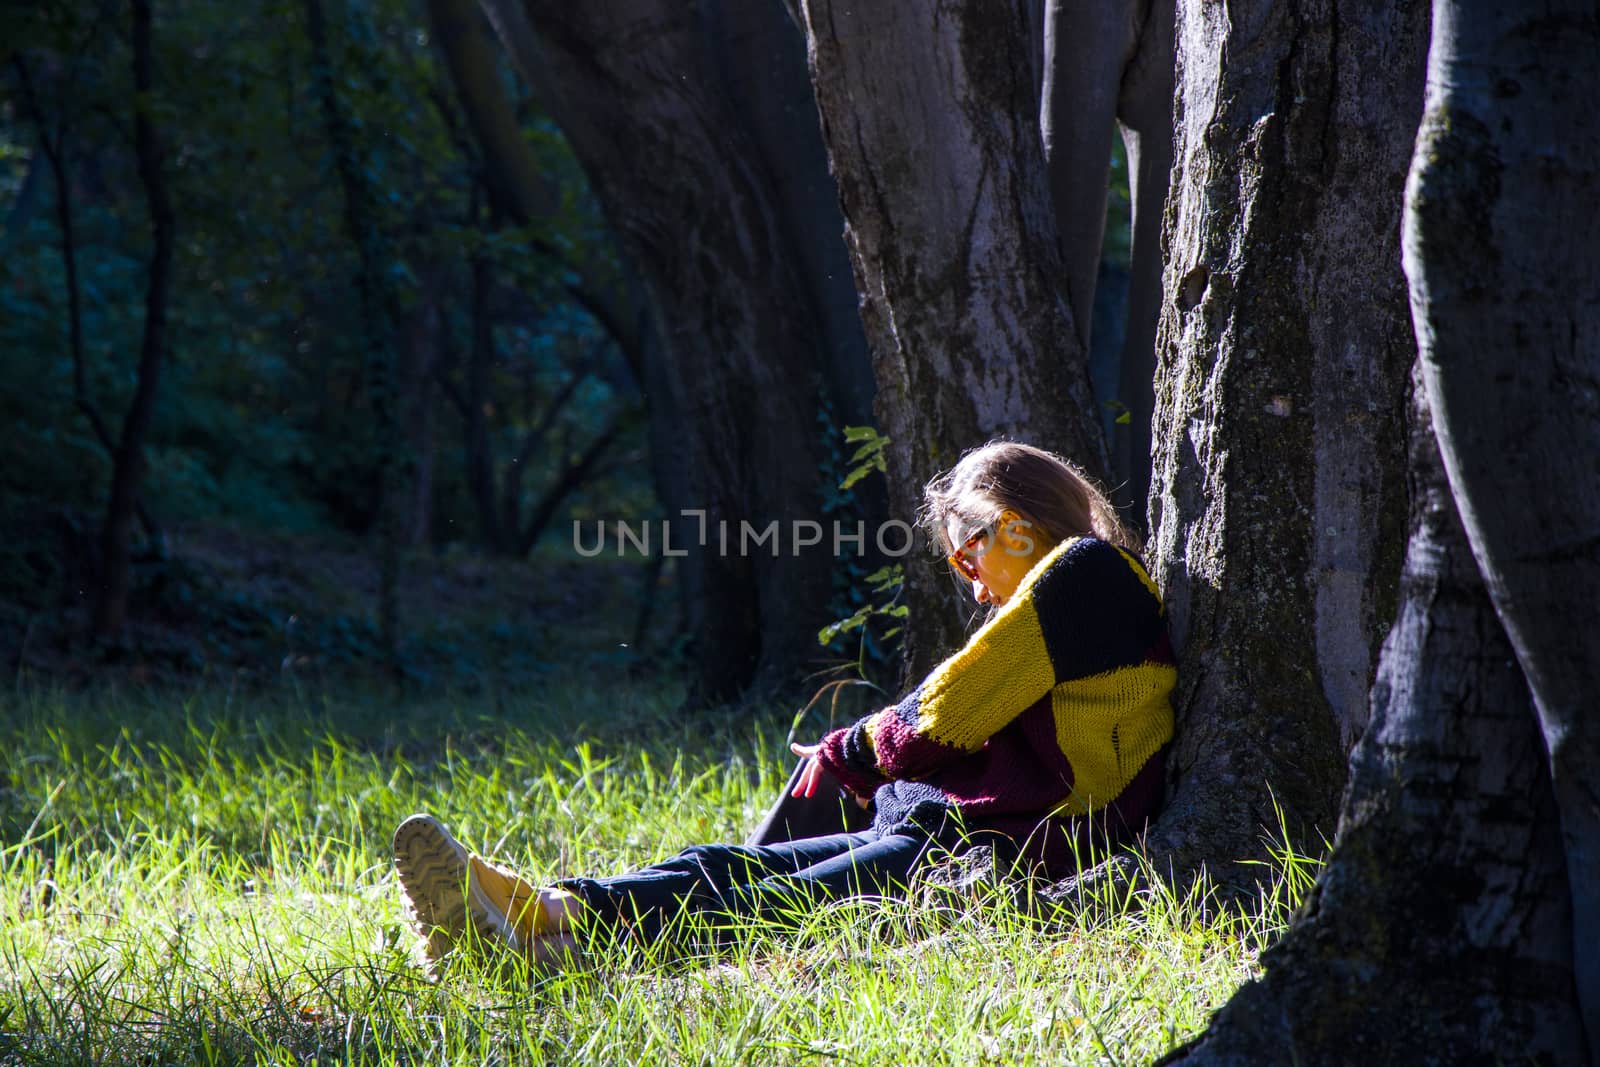 Woman in the botanic garden and park, trees and casual young girl portrait in garden